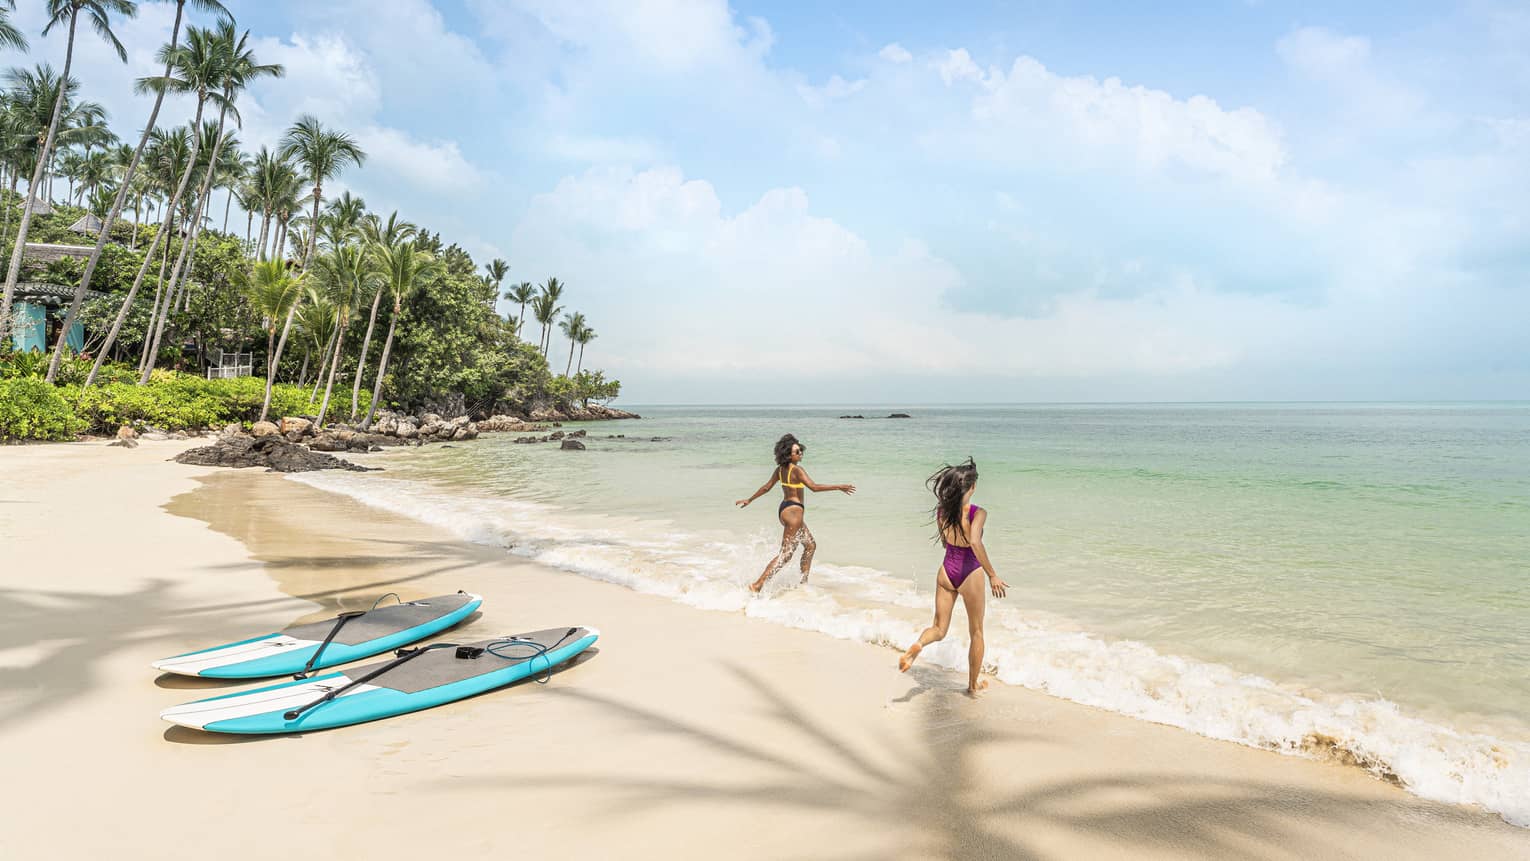 Two women in swimsuits wade into the water at the beach, their surfboards on the shore behind them